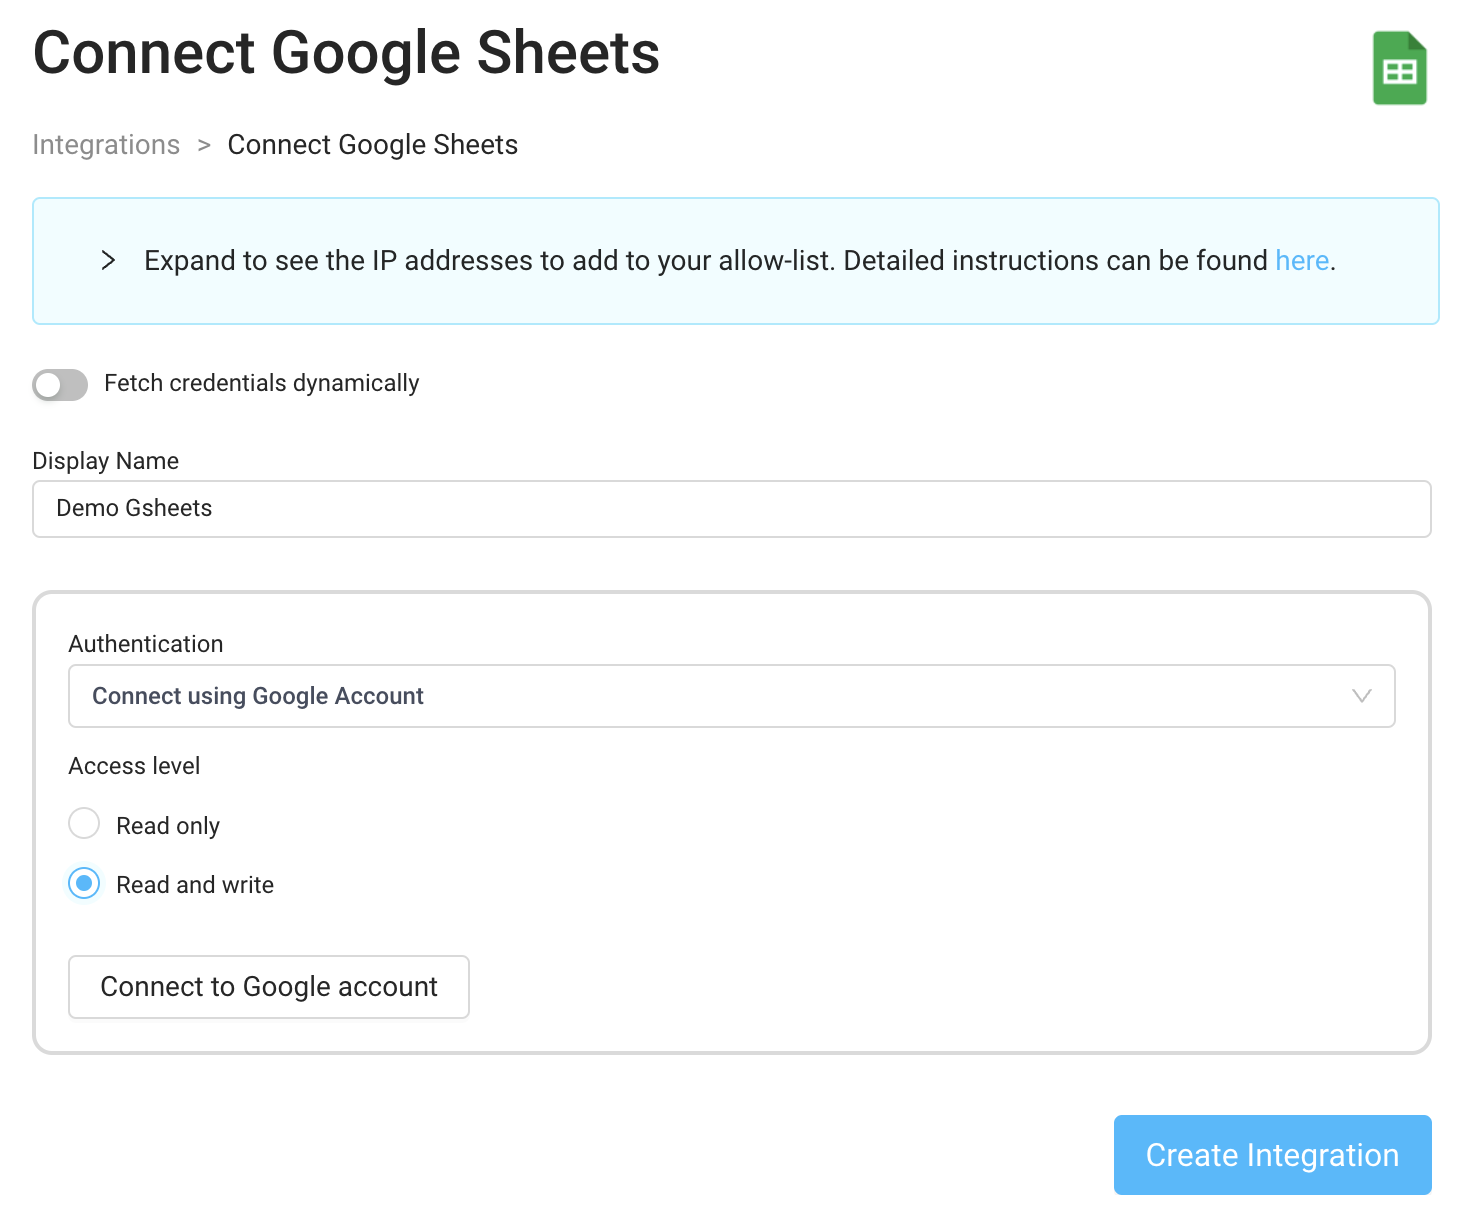 Connect to Google Sheets using a Google account